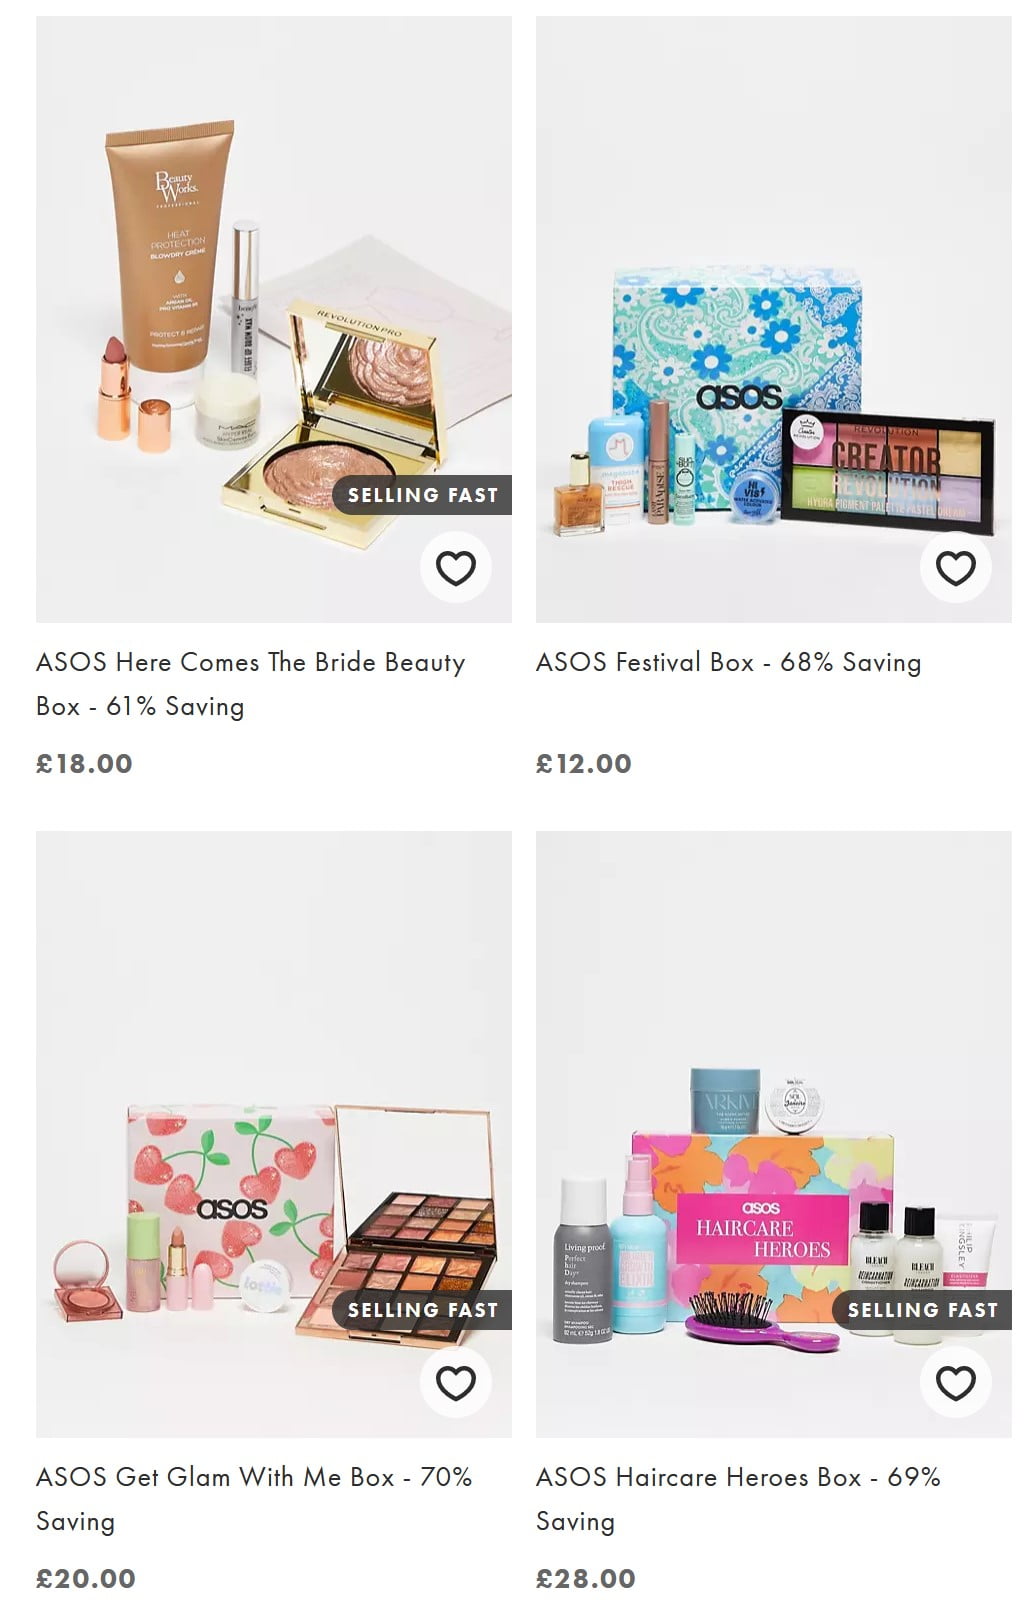 20% off ASOS Beauty Boxes